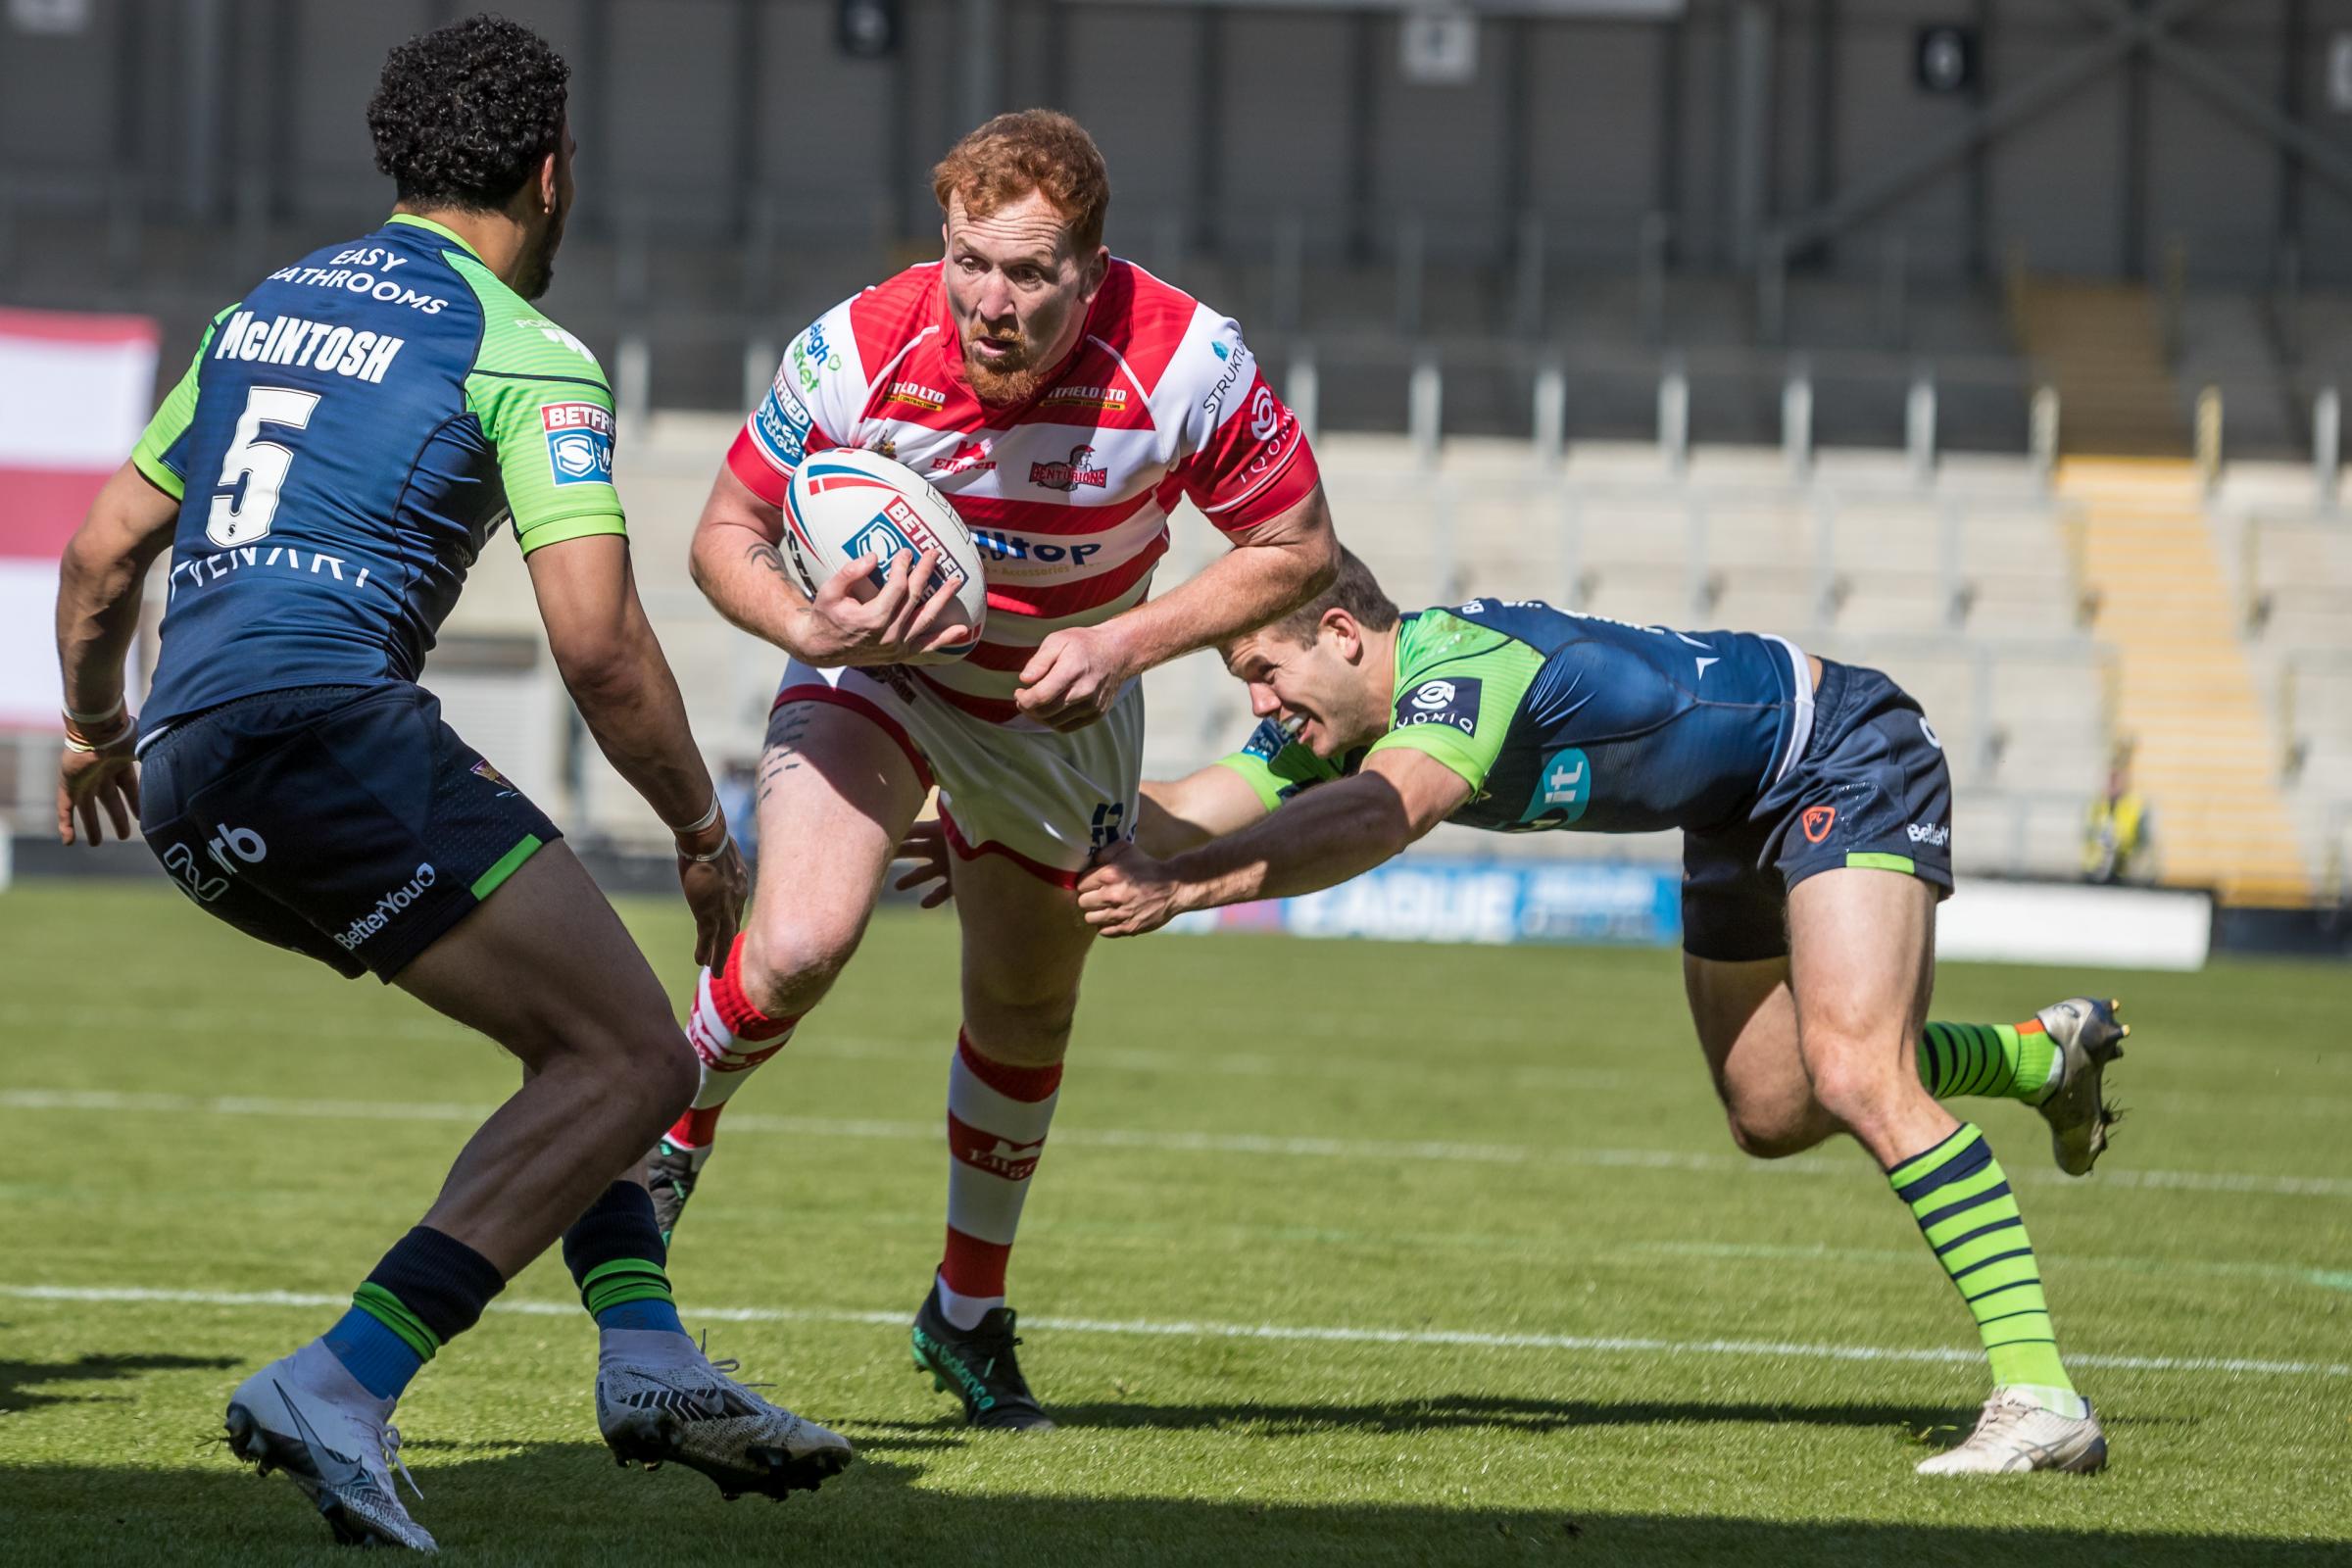 Leigh Centurions 21-man squad to face Castleford Tigers